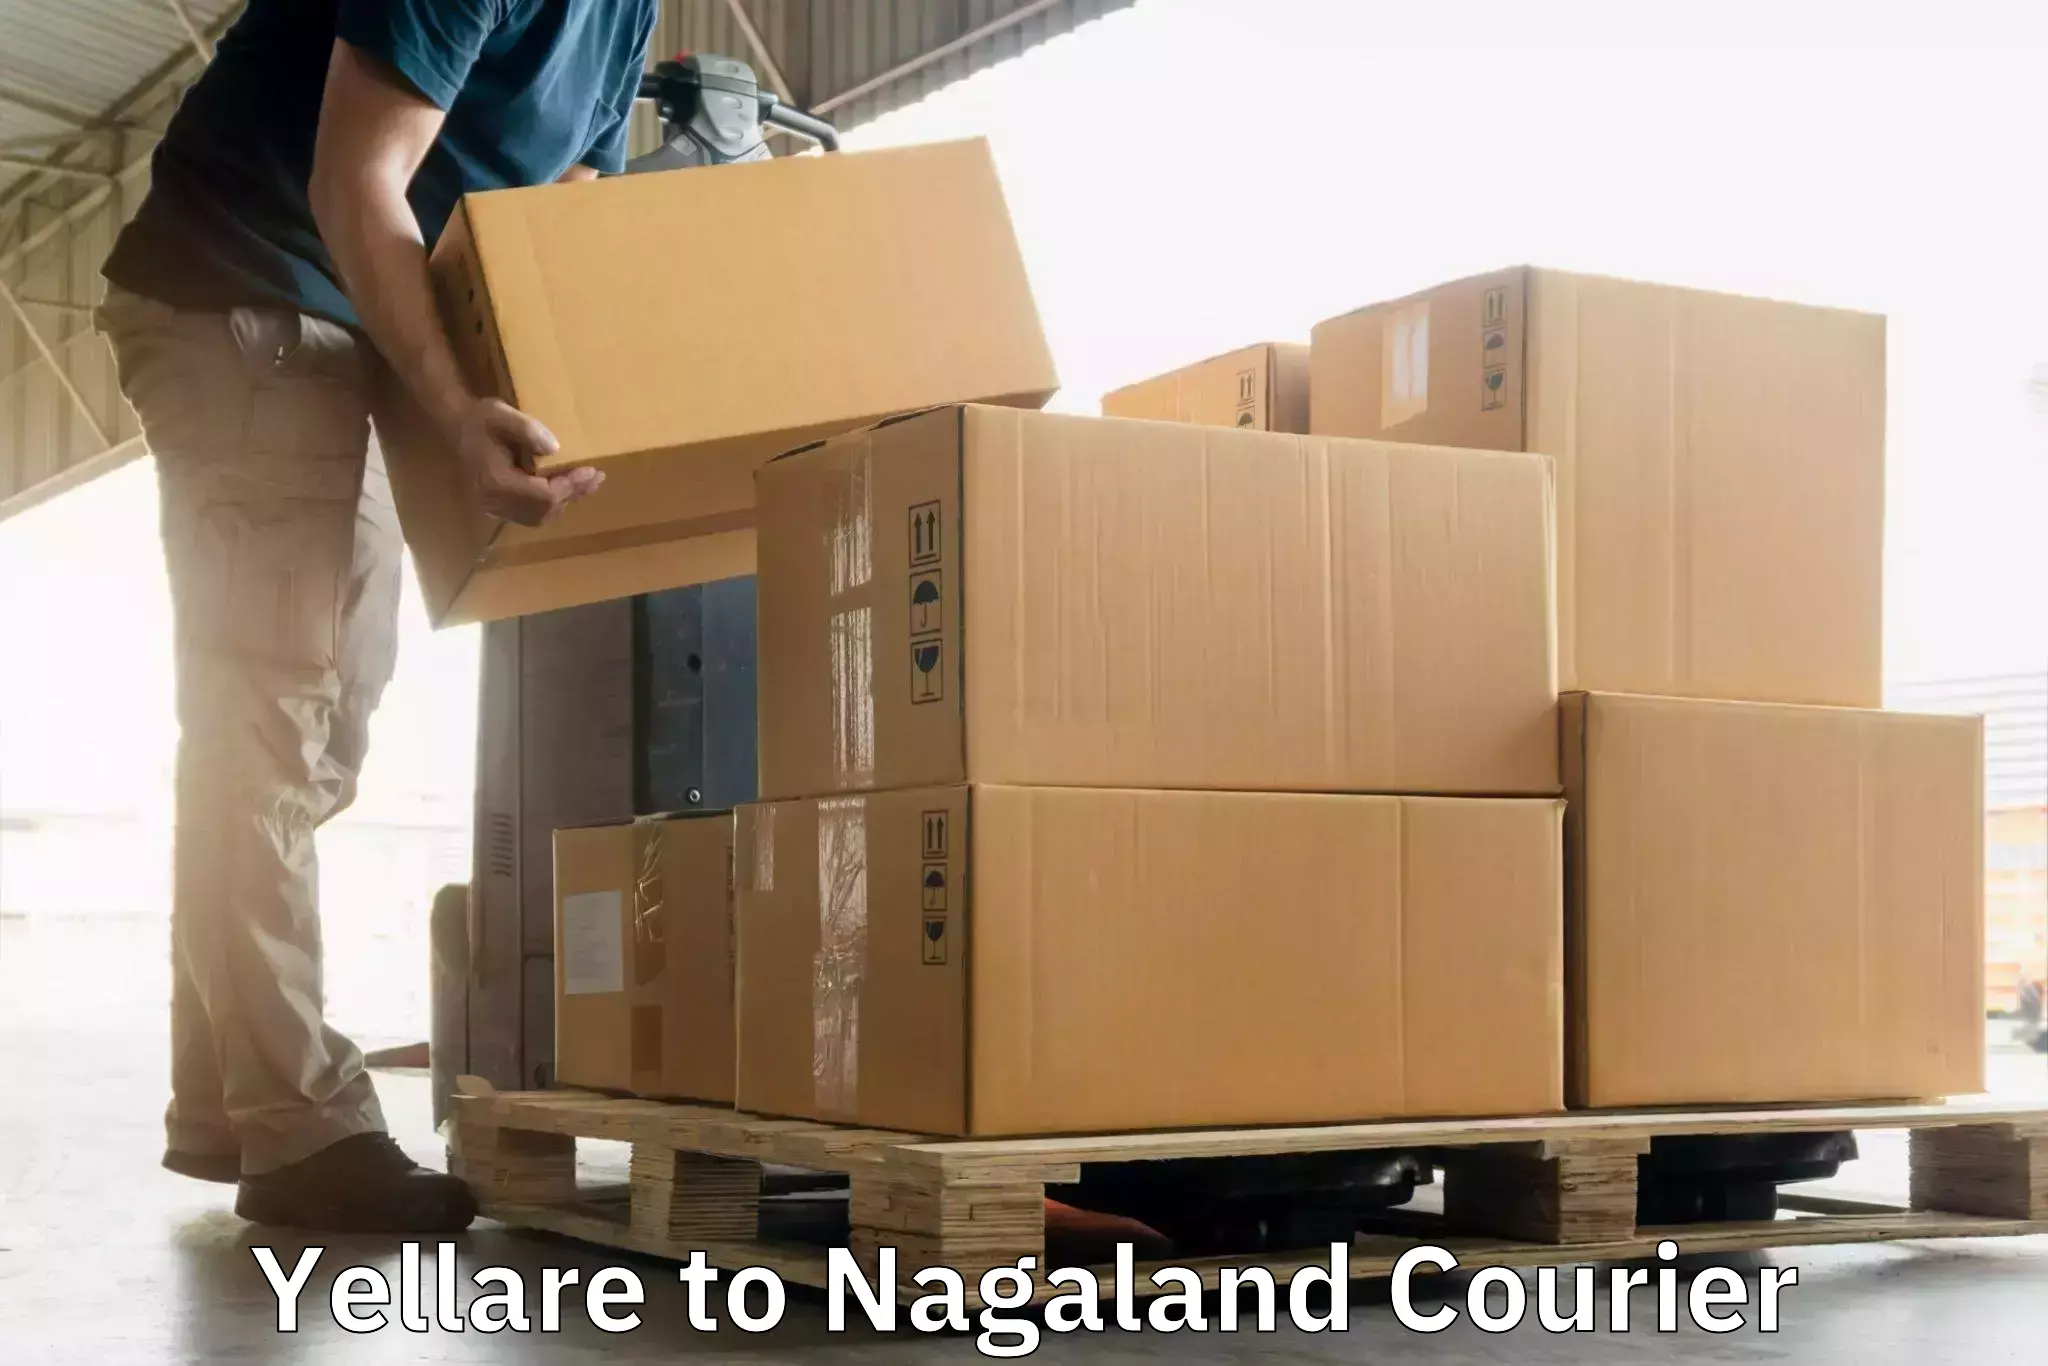 State-of-the-art courier technology Yellare to Mon